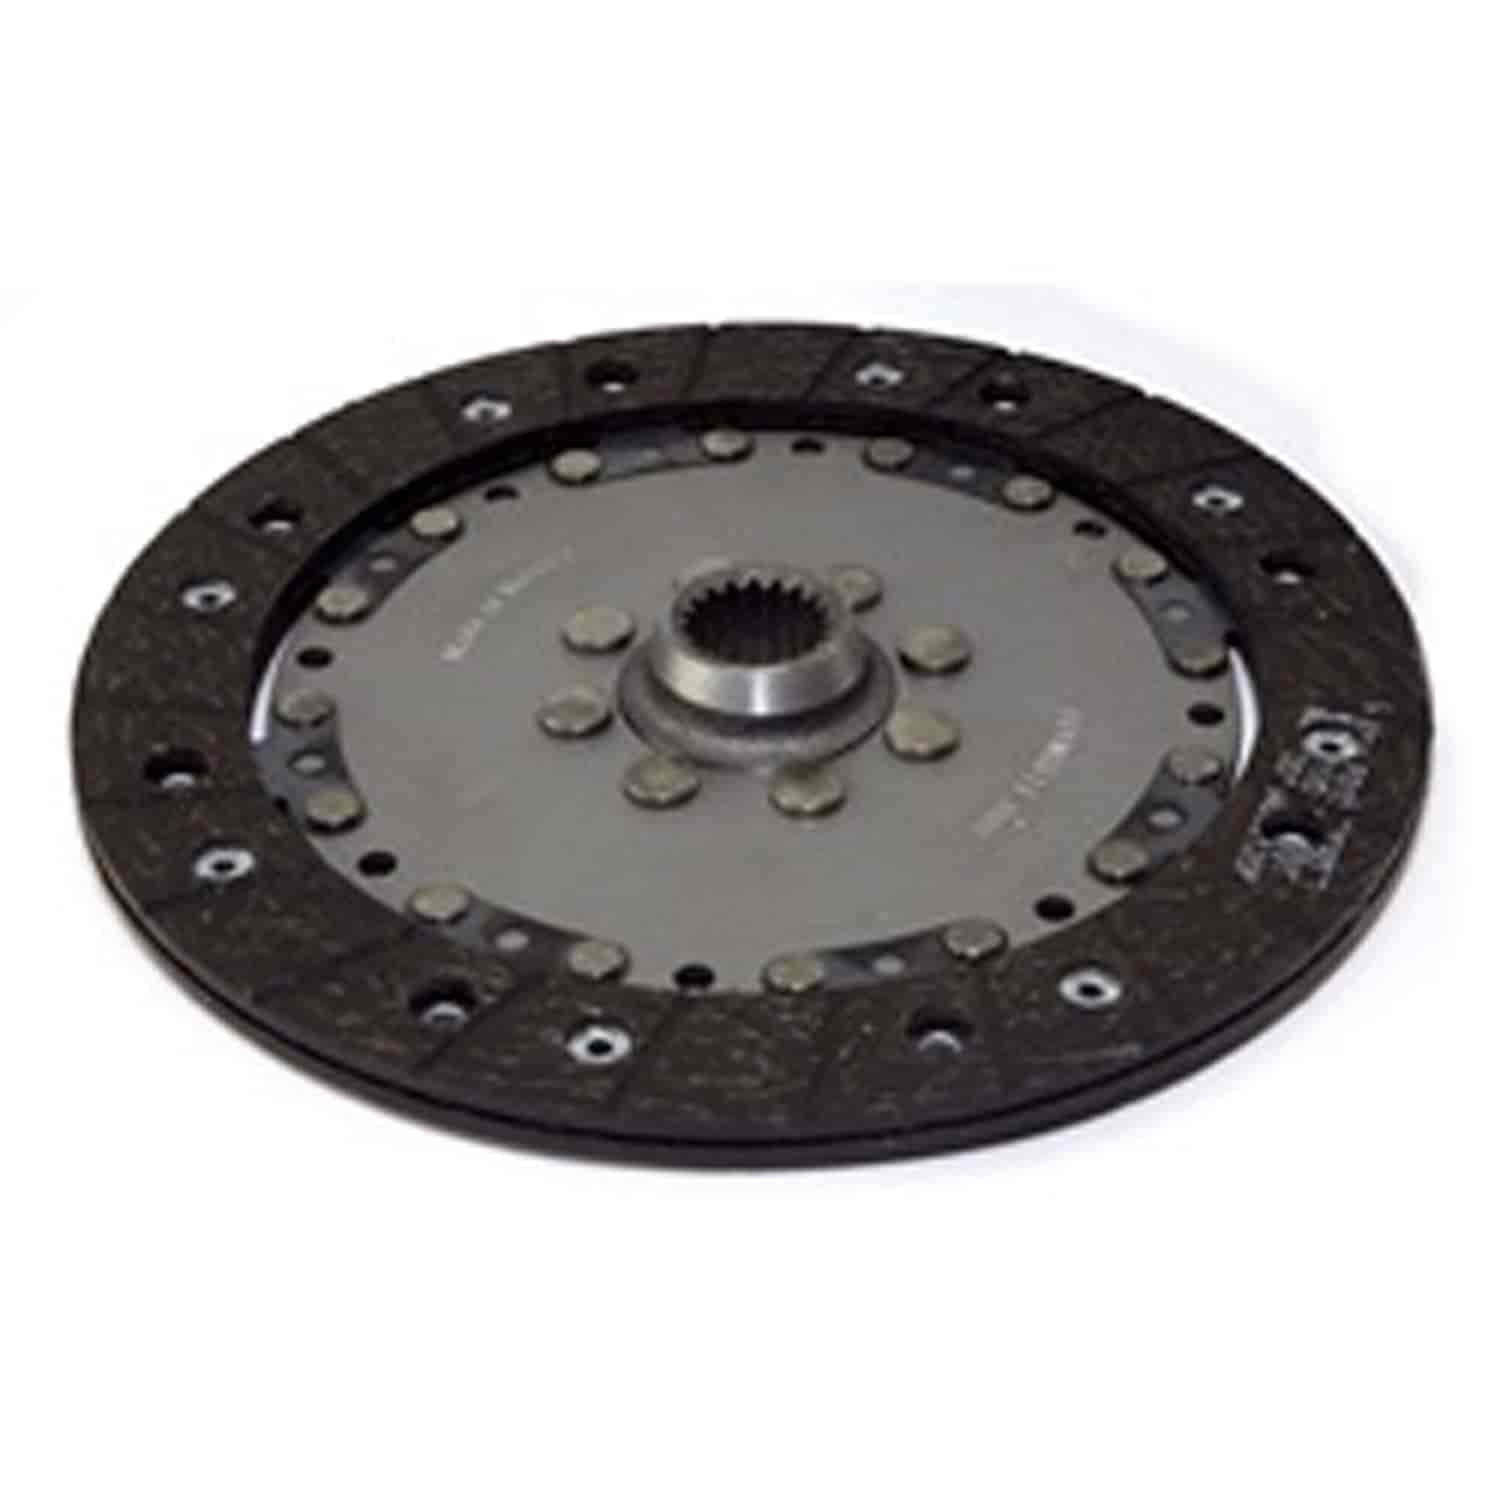 This clutch disc from Omix-ADA fits 02-06 Jeep Libertys and 03-04 Wranglers with a 2.4L engine.